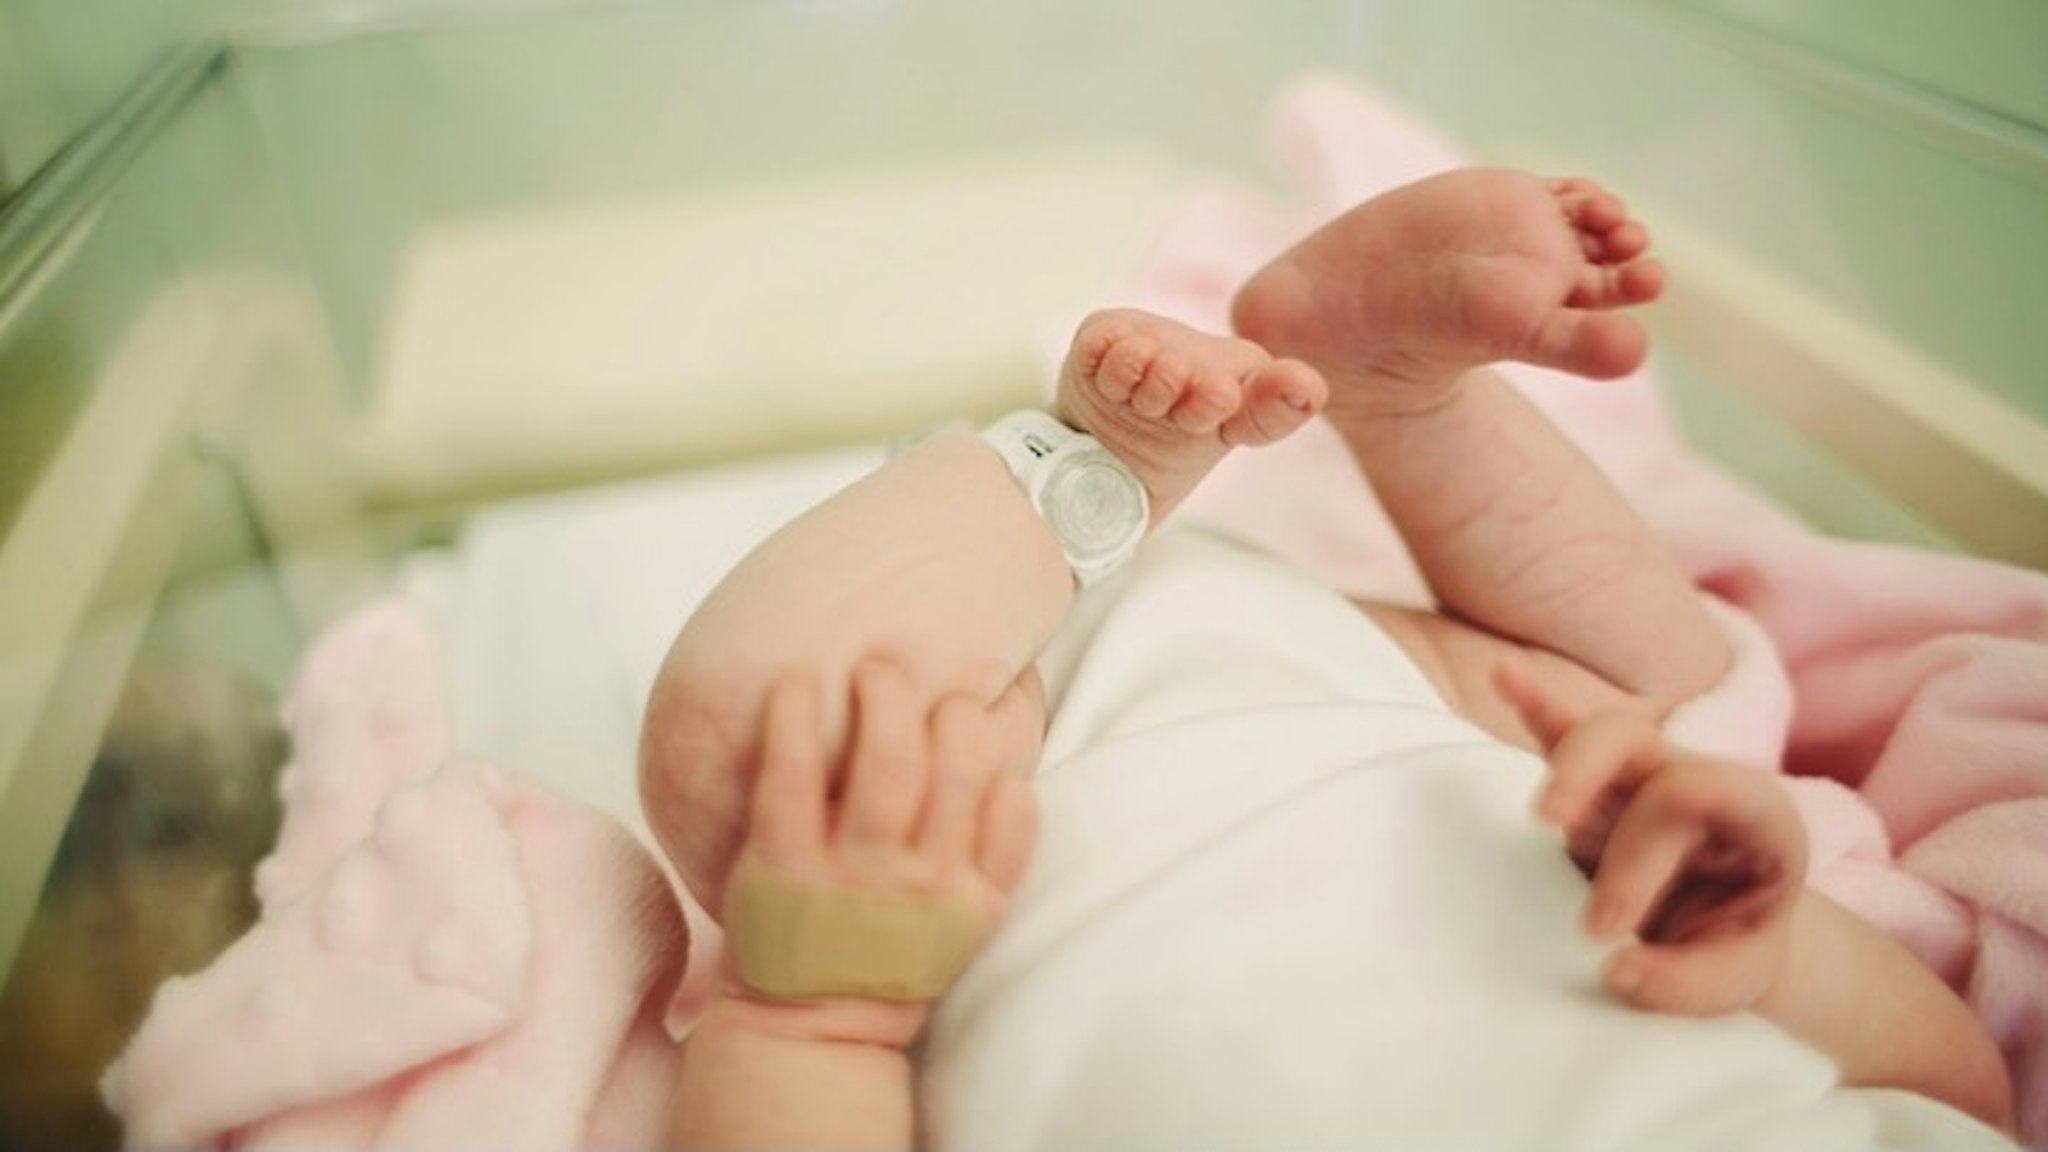 Baby in hospital - stock photo View of baby's feet with a hospital security tag on Sally Anscombe via Getty Images